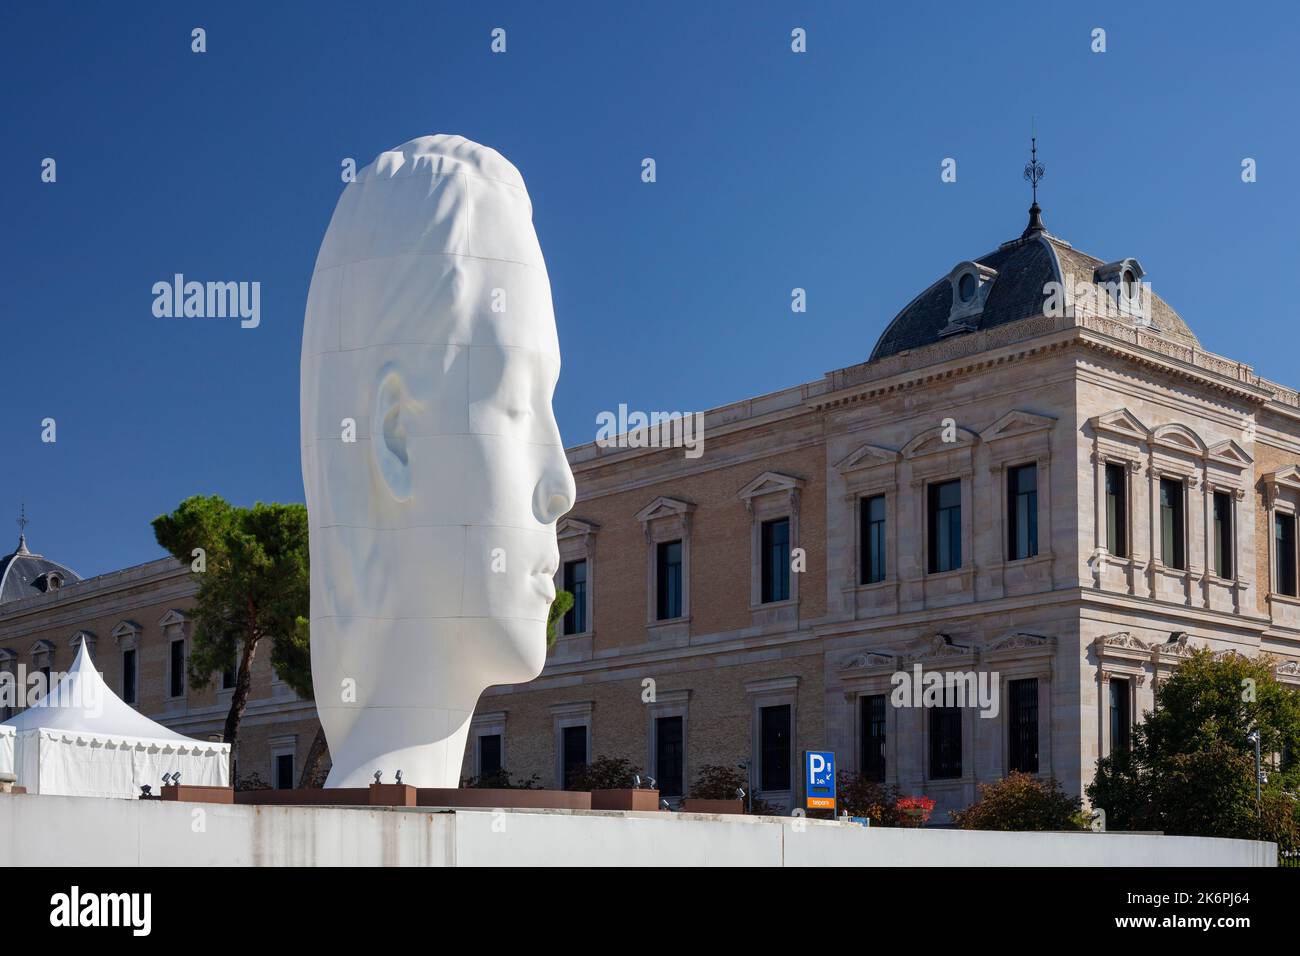 Editorial Madrid, Spain - September 20, 2022: The 12 meter high sculpture of 'Julia' in the Plaza Colon in Madrid, Spain, Europe. Stock Photo